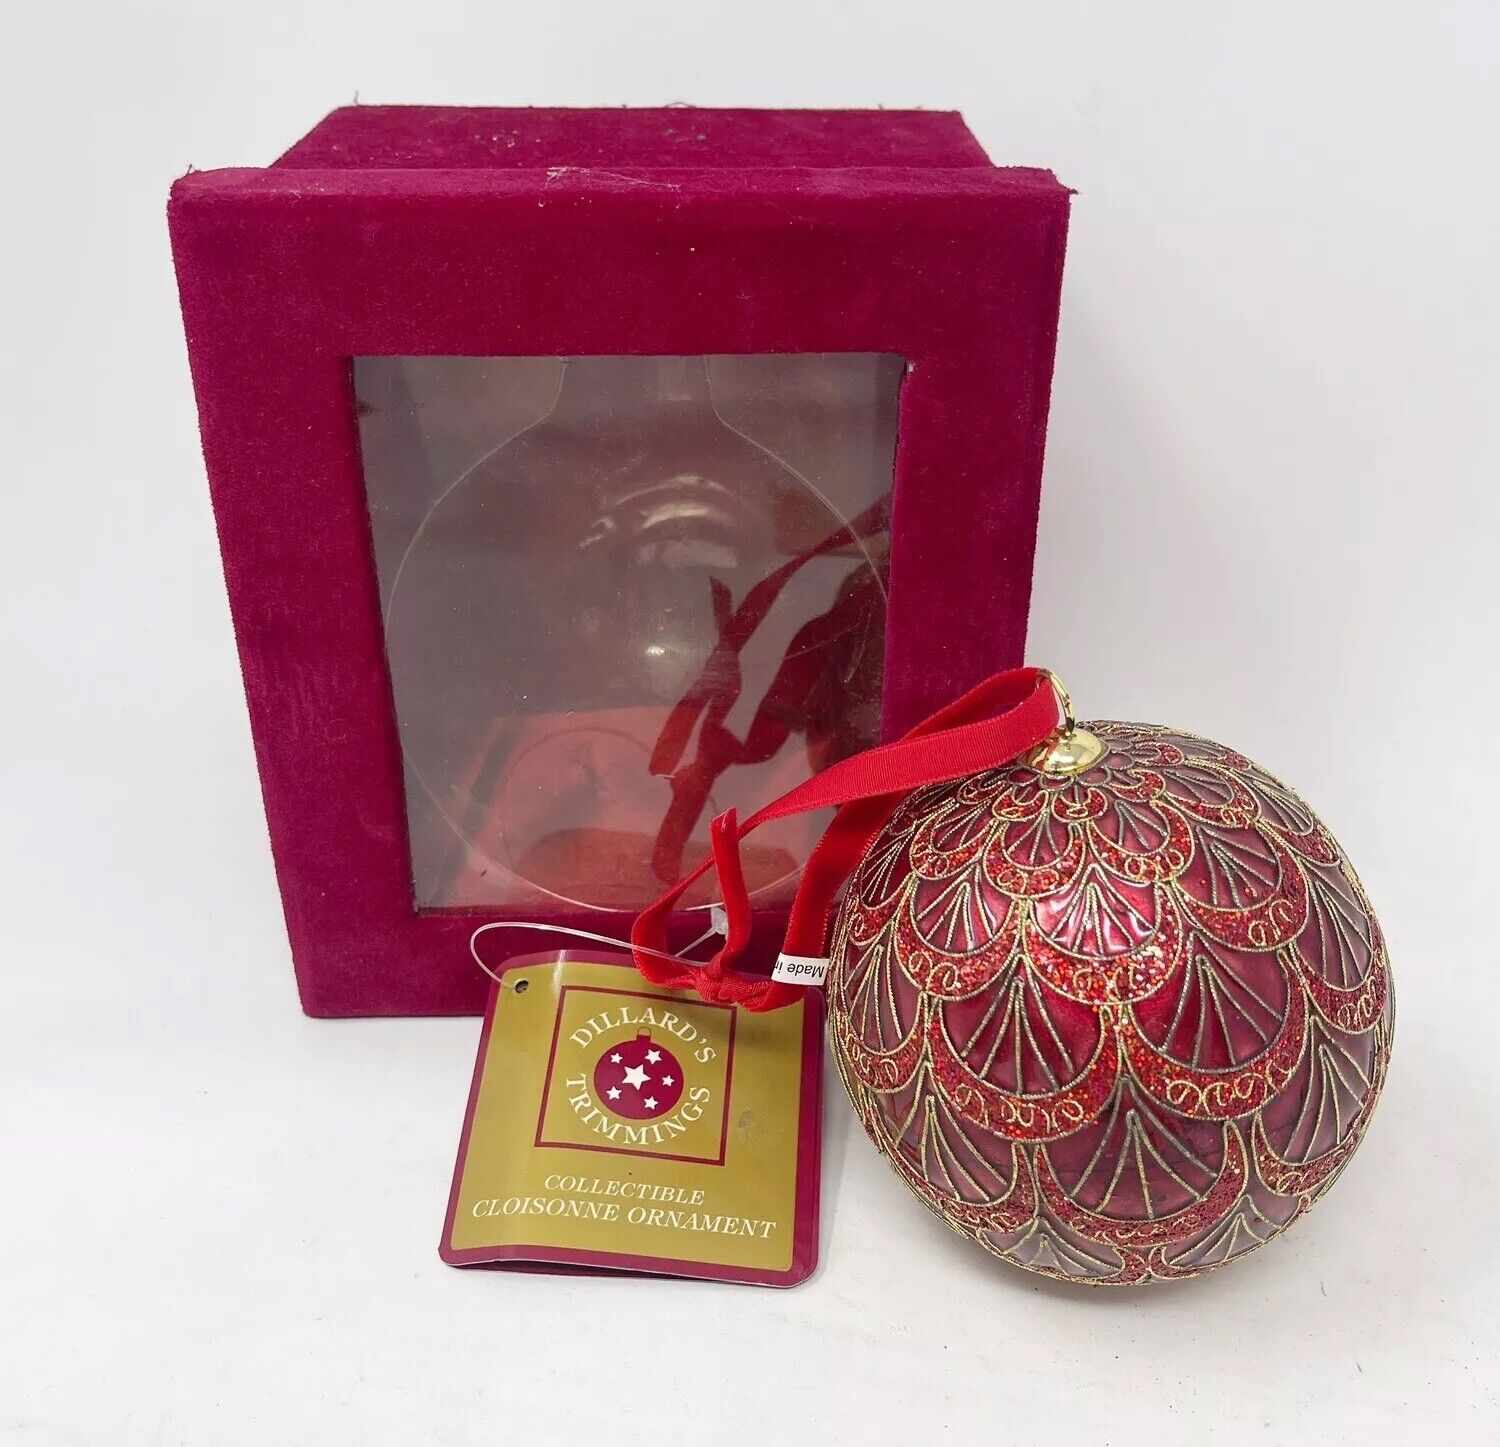 Vintage Dillard’s Collectible Cloisonné Ball Christmas Ornament Red Scalloped